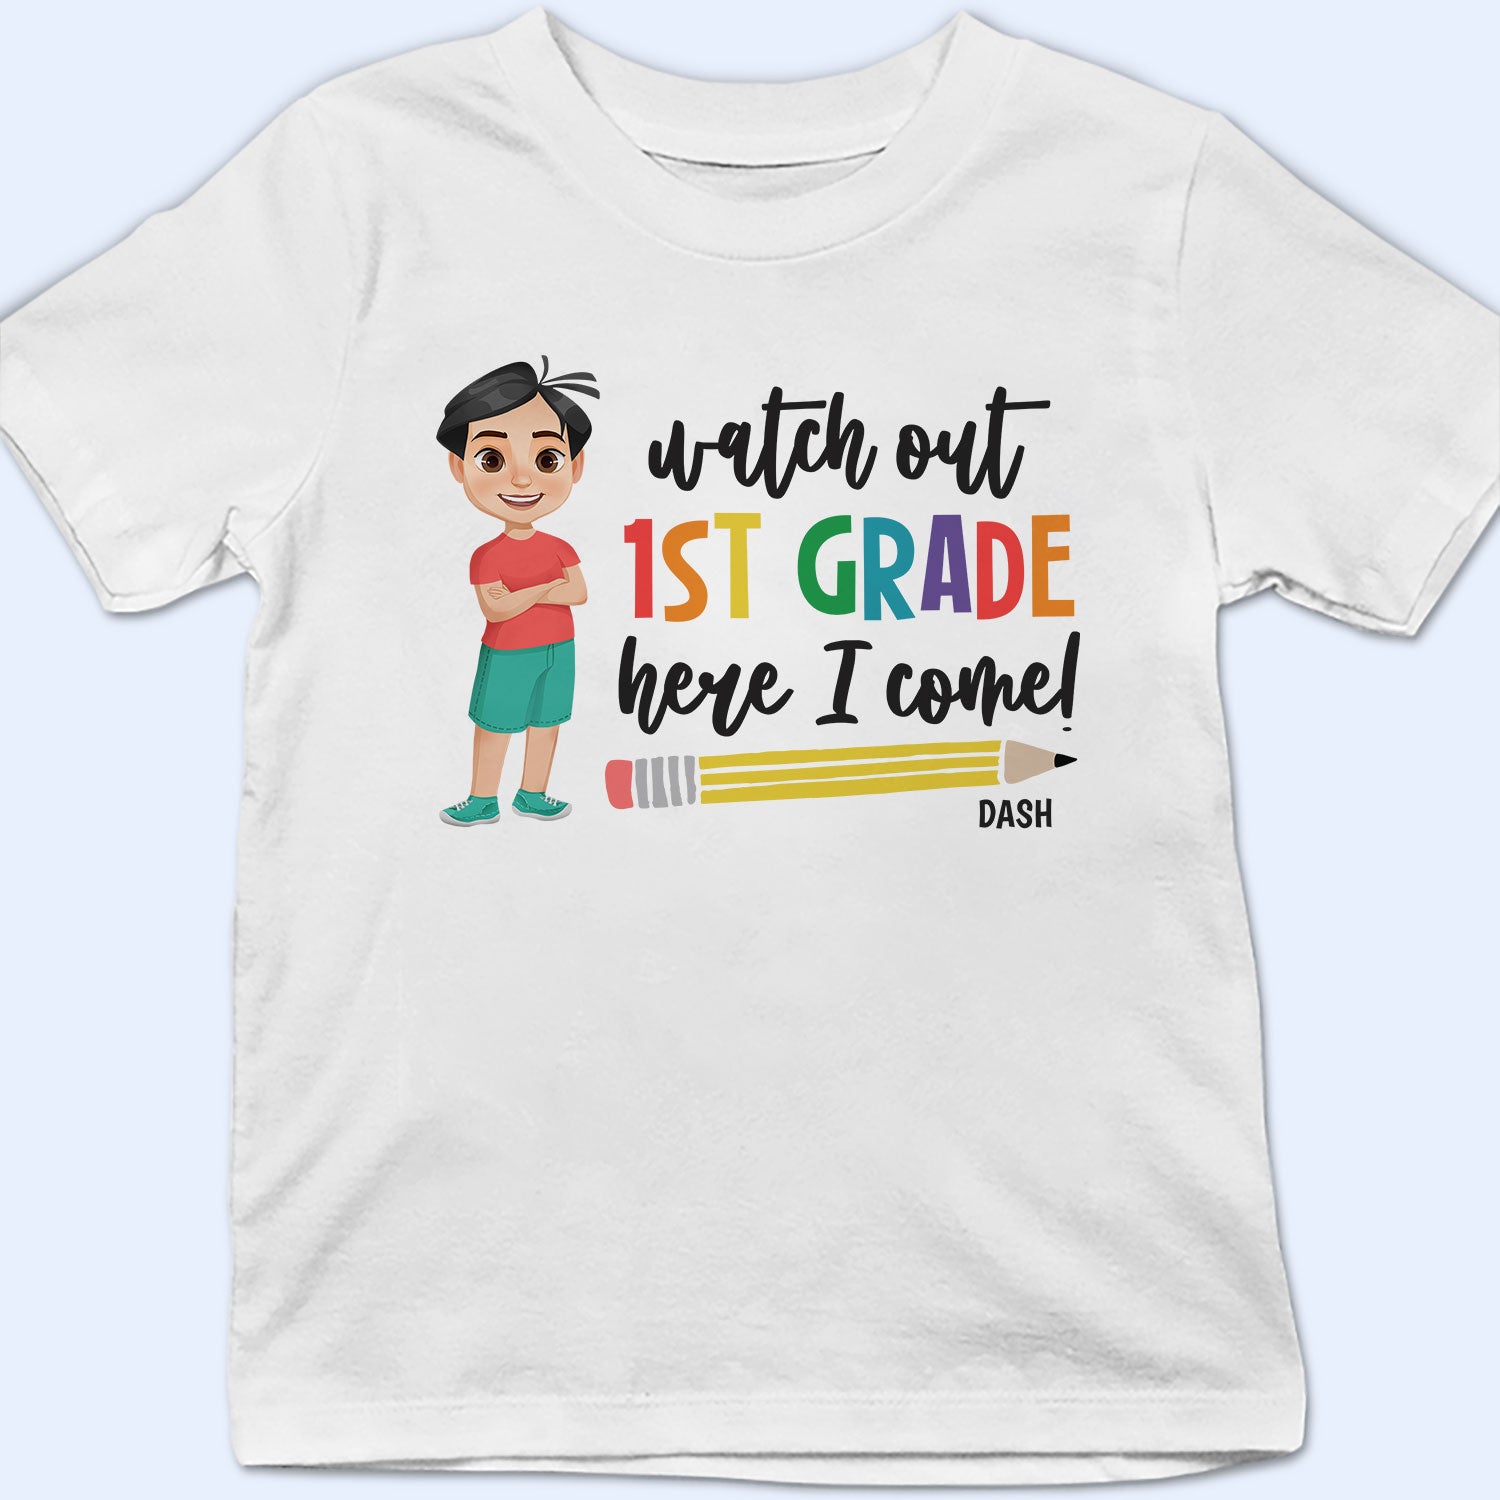 Watch Out Kindergarten Here I Come - Gift For Kids, Back To School - Personalized T Shirt